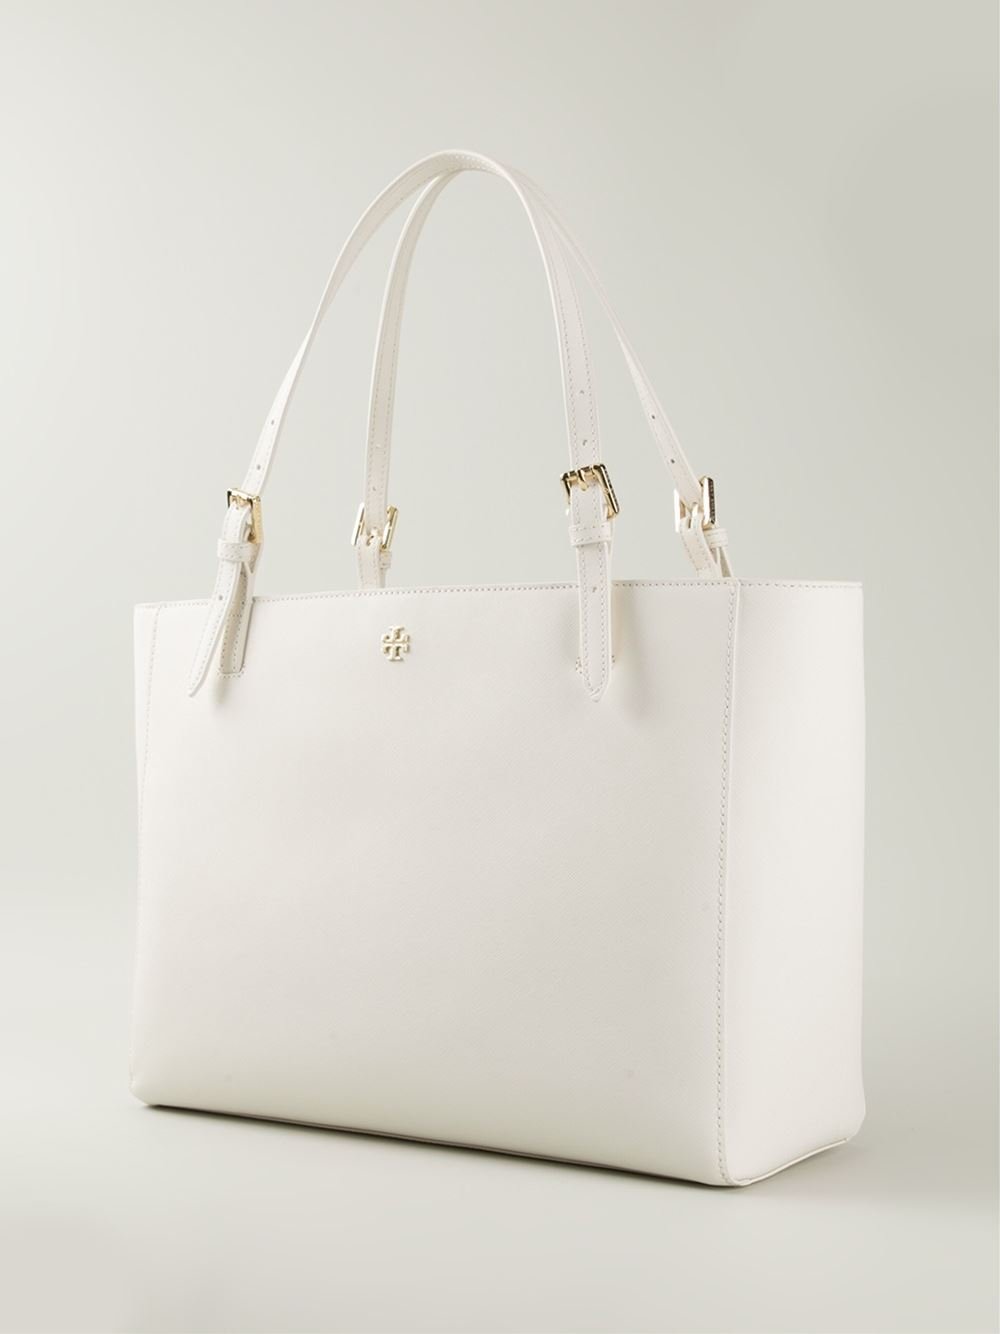 Tory Burch York Buckle Leather Tote in White | Lyst